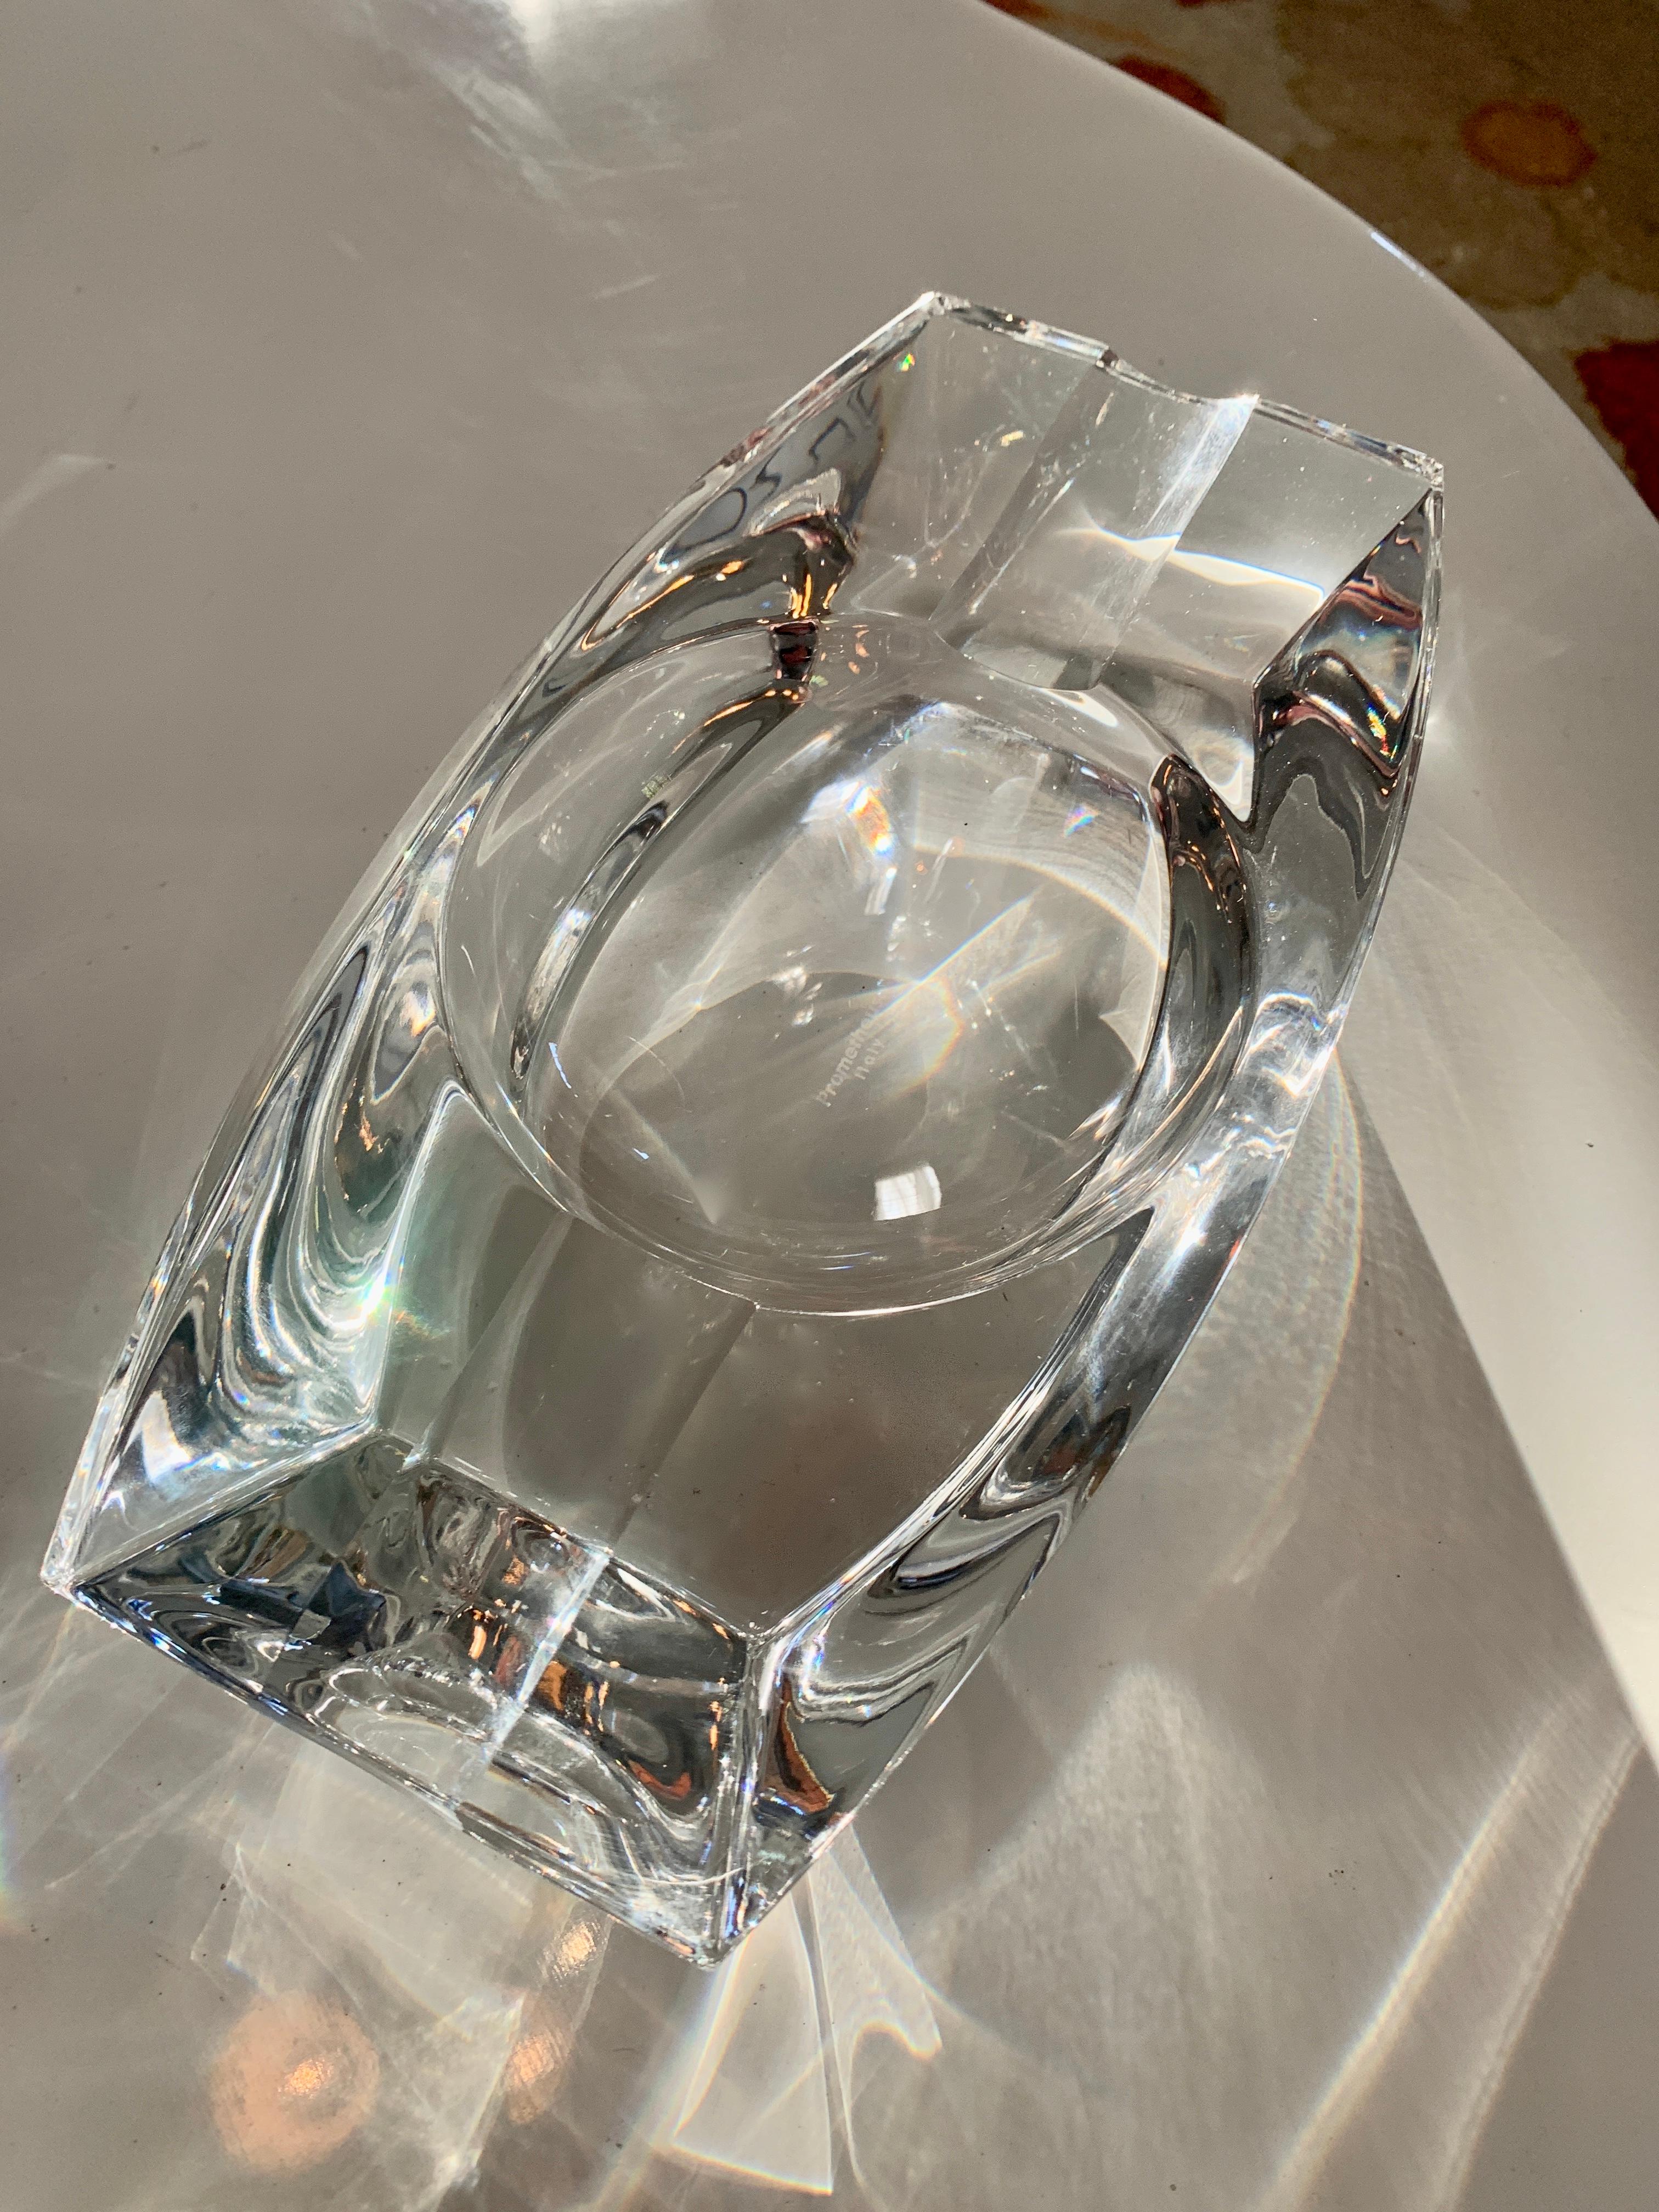 Large and of substantial weight, our Italian cut crystal Mid-Century Modern influenced Cigar ashtray has space for two cigars, or roll a nice 420 blunt, grab a glass and relax!

The facets and cuts of the piece create a show piece that is an